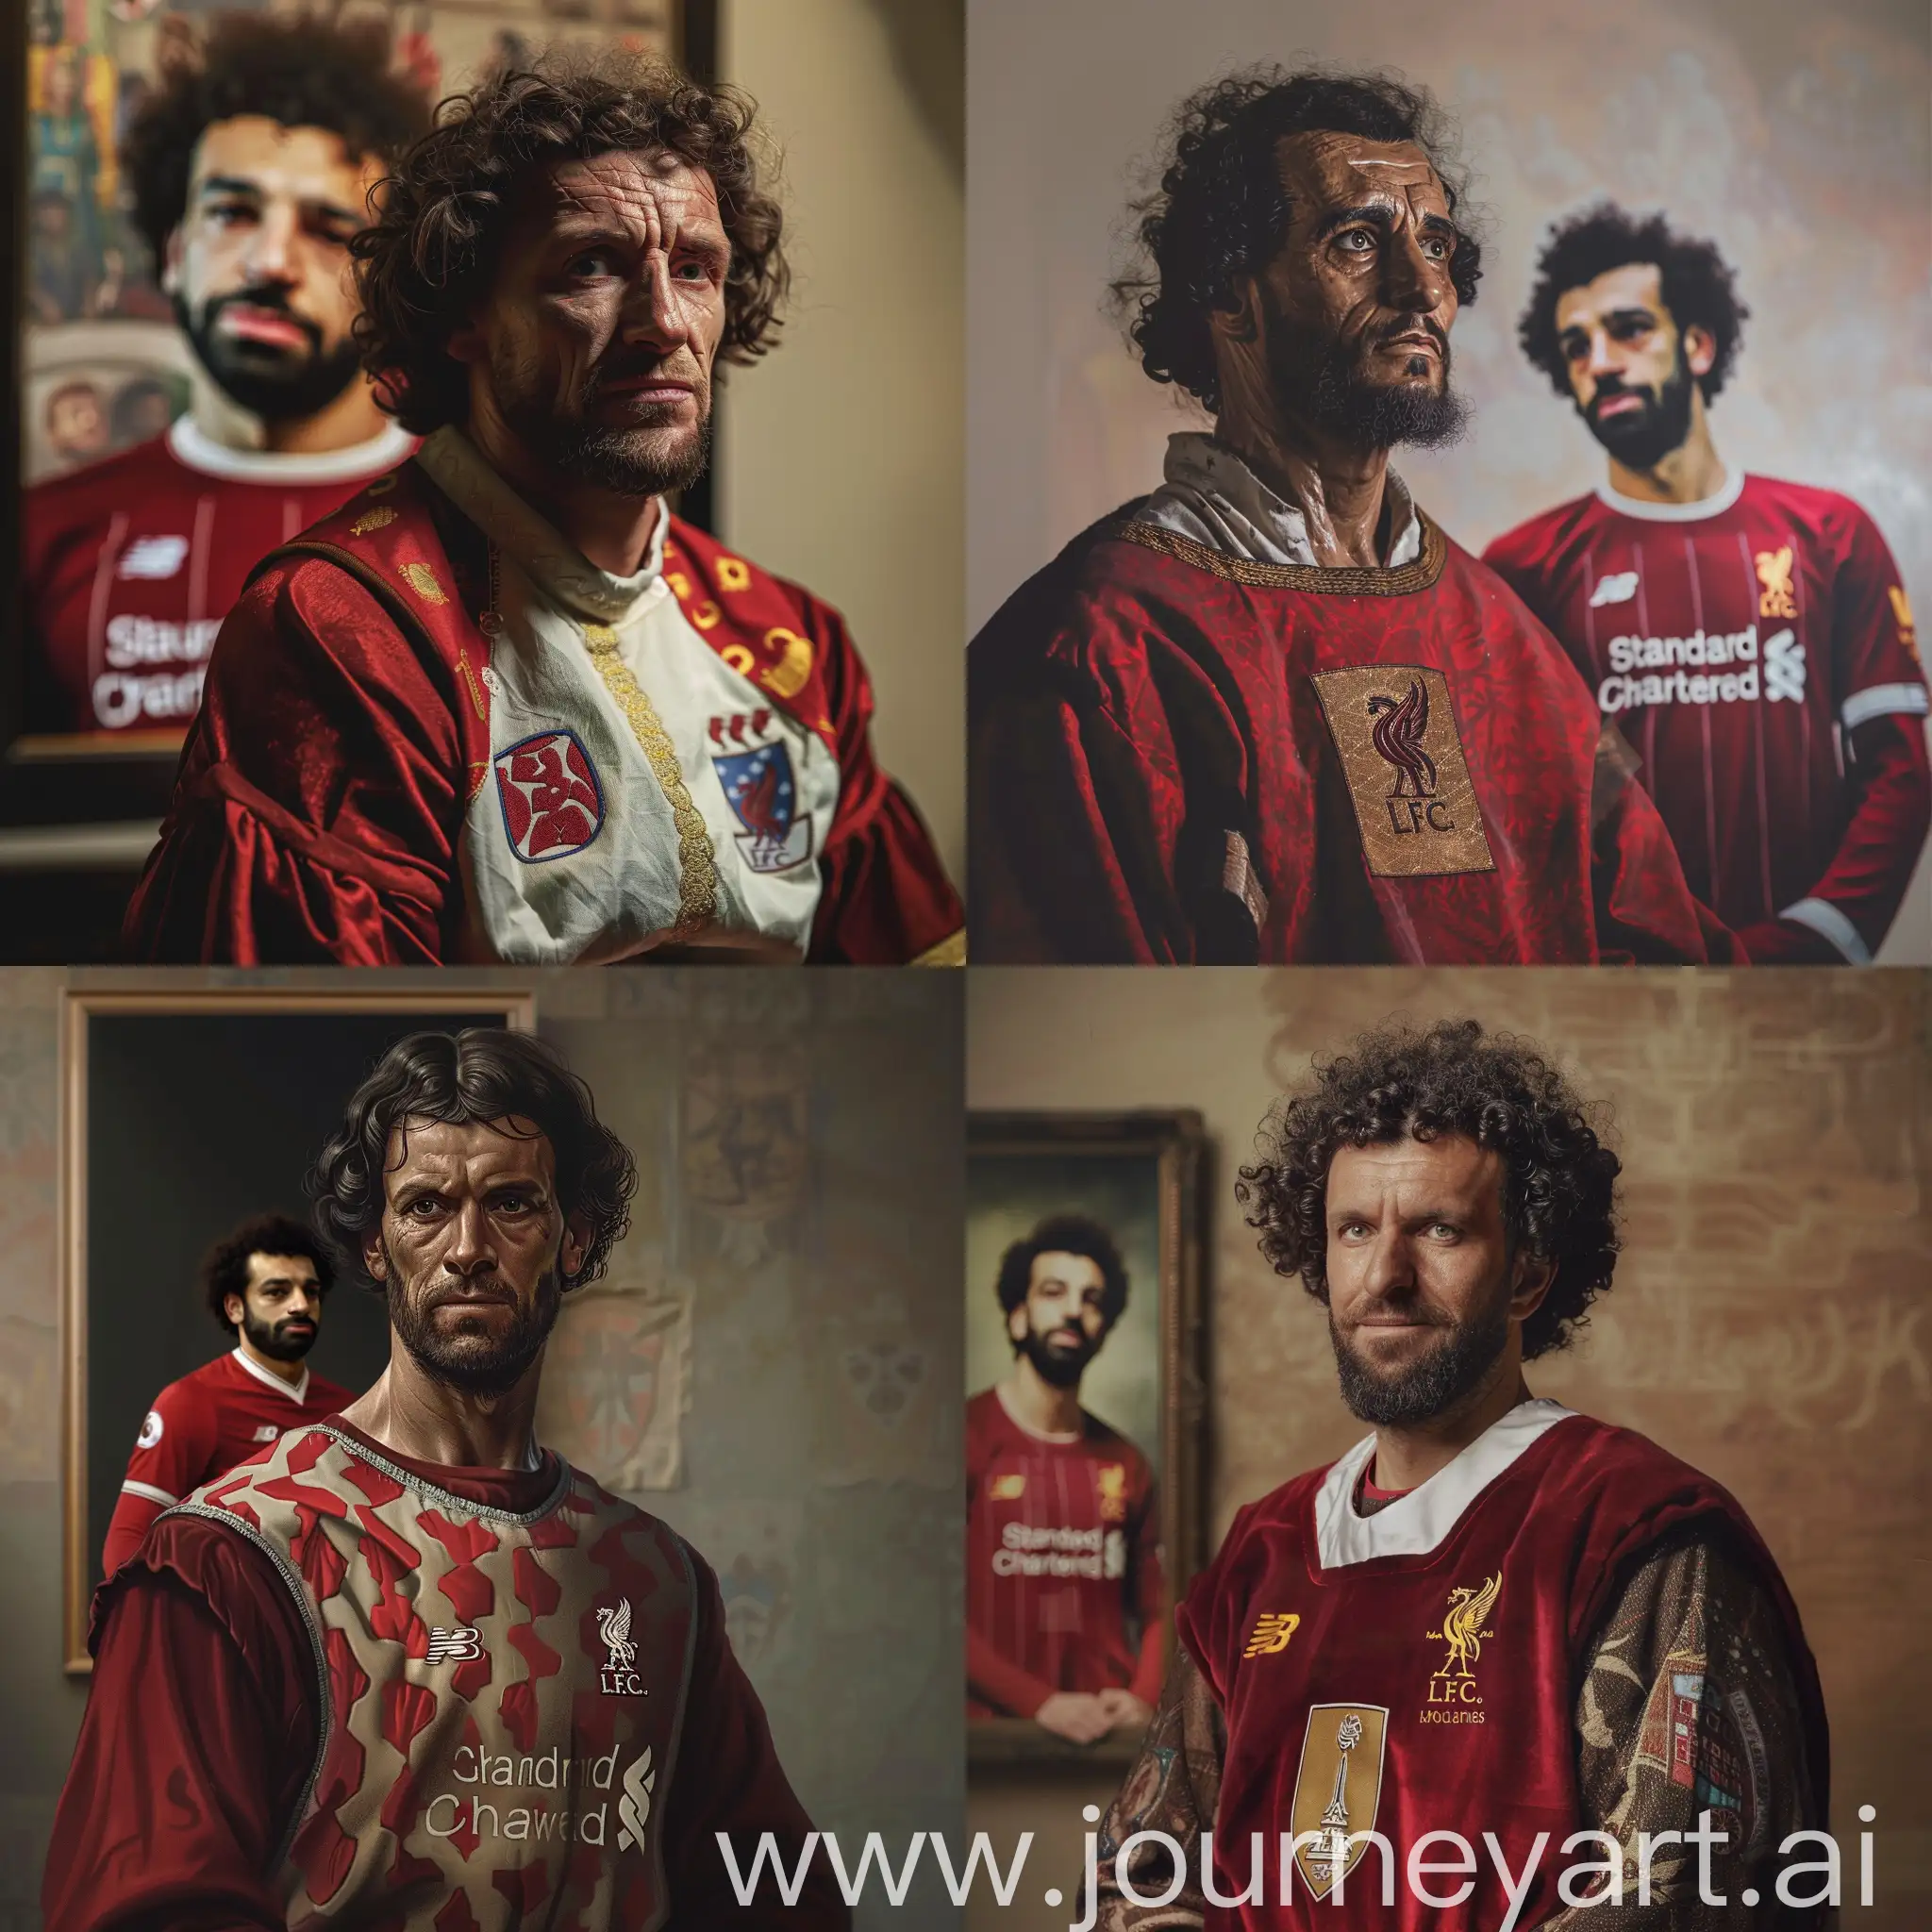 Portrait of man from 1400s england but he is wearing a liverpool fc jersey and in the background is a photo of mohamed salah